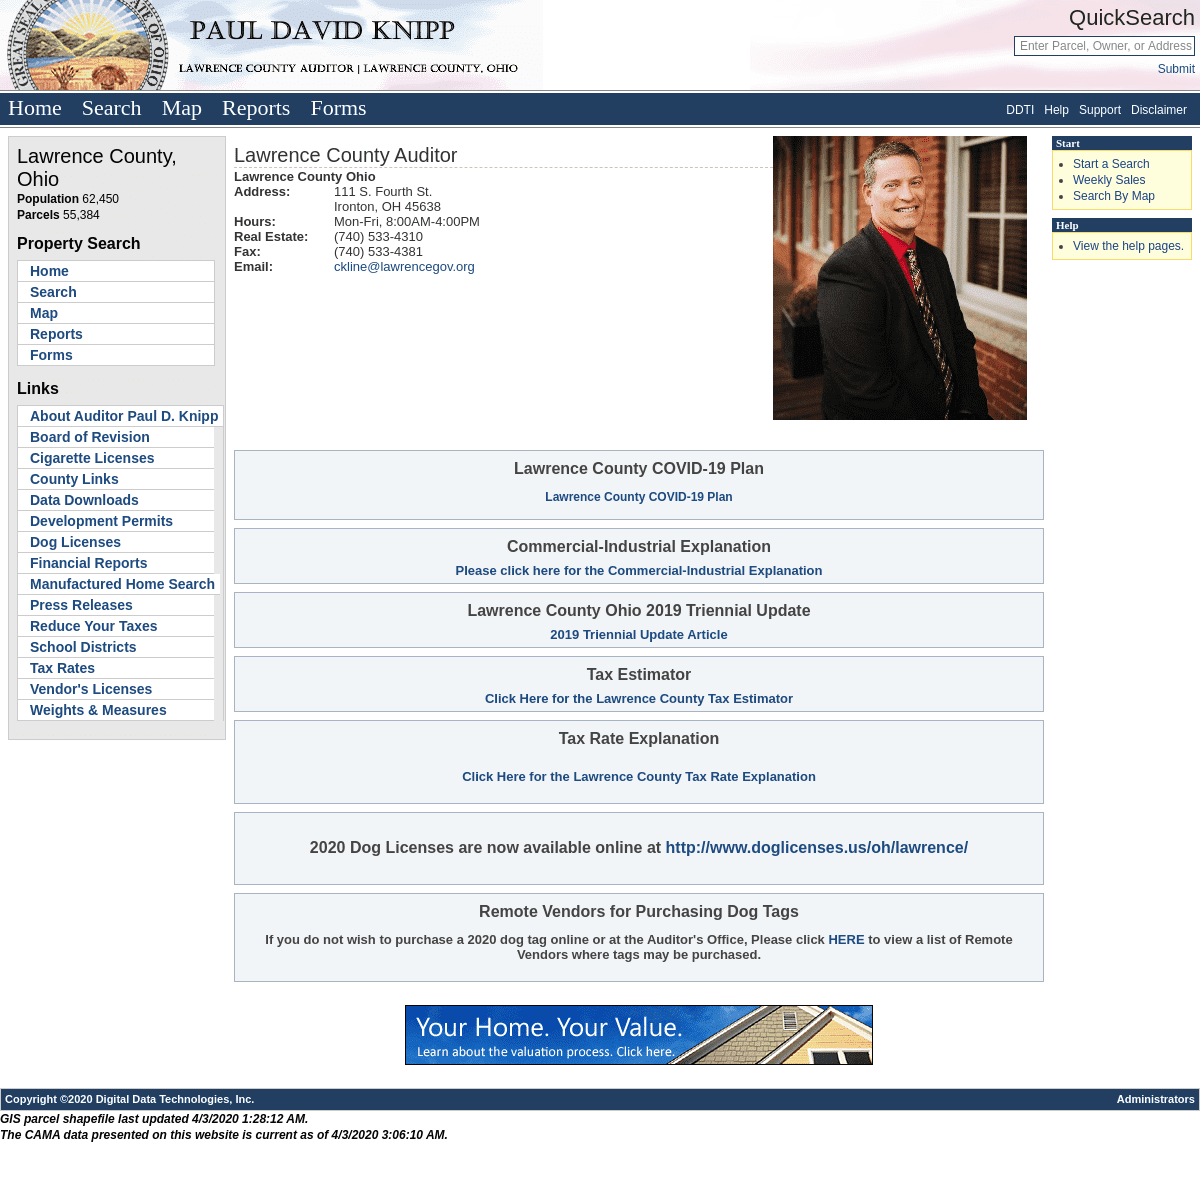 A complete backup of lawrencecountyauditor.org